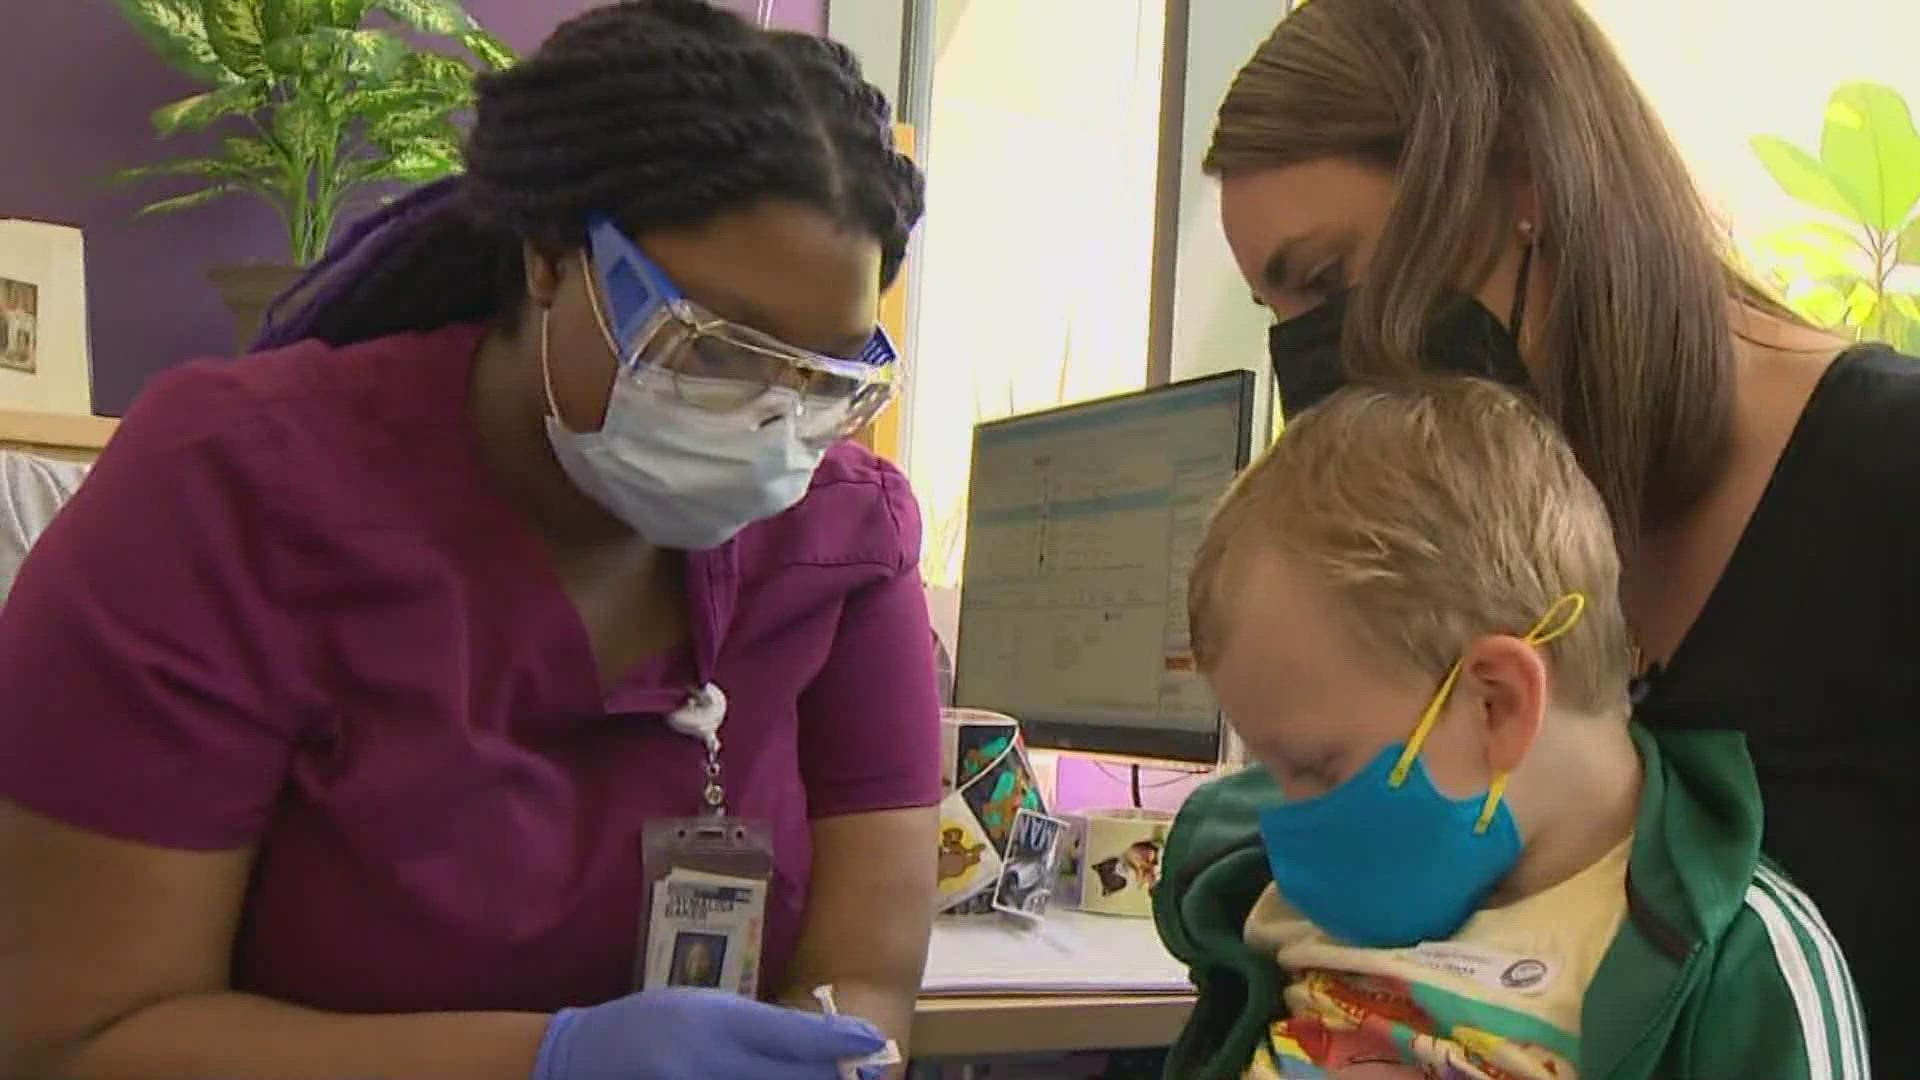 Staff at Seattle Children's Hospital said everyone was emotional for this historic day.